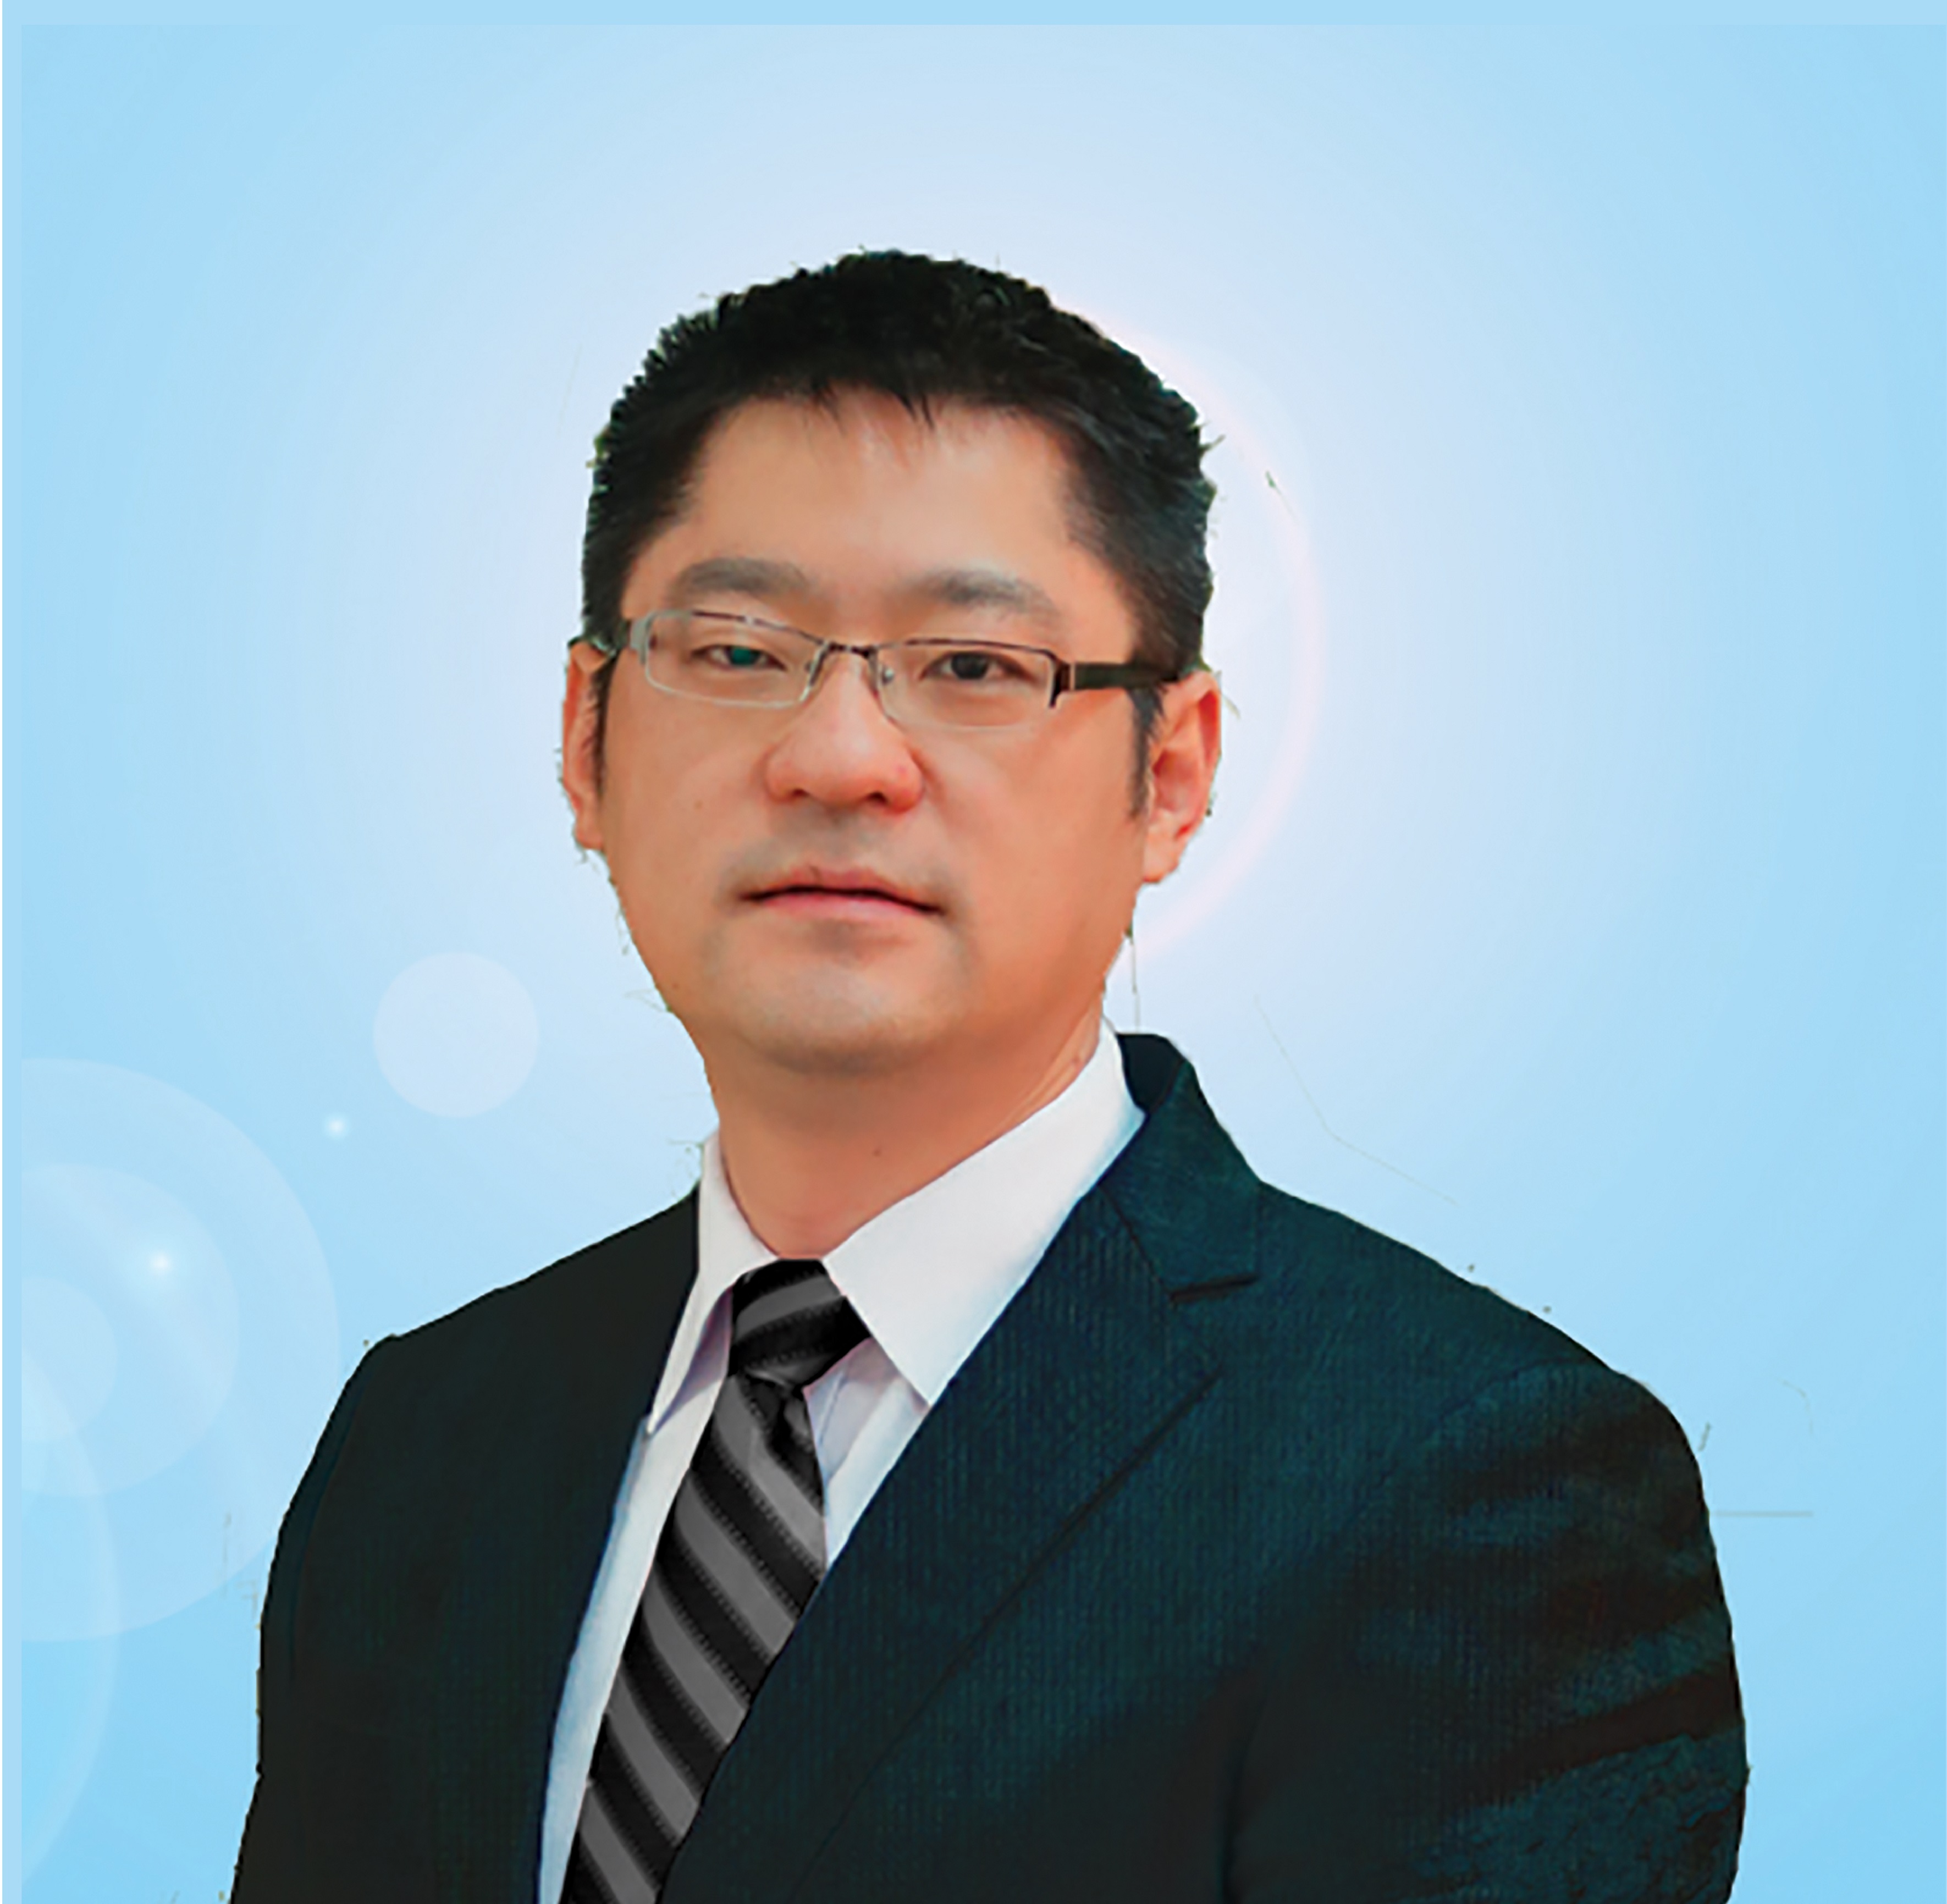 Mr Richie Cao Shi XuanExecutive Director and Deputy Chief Executive Officer